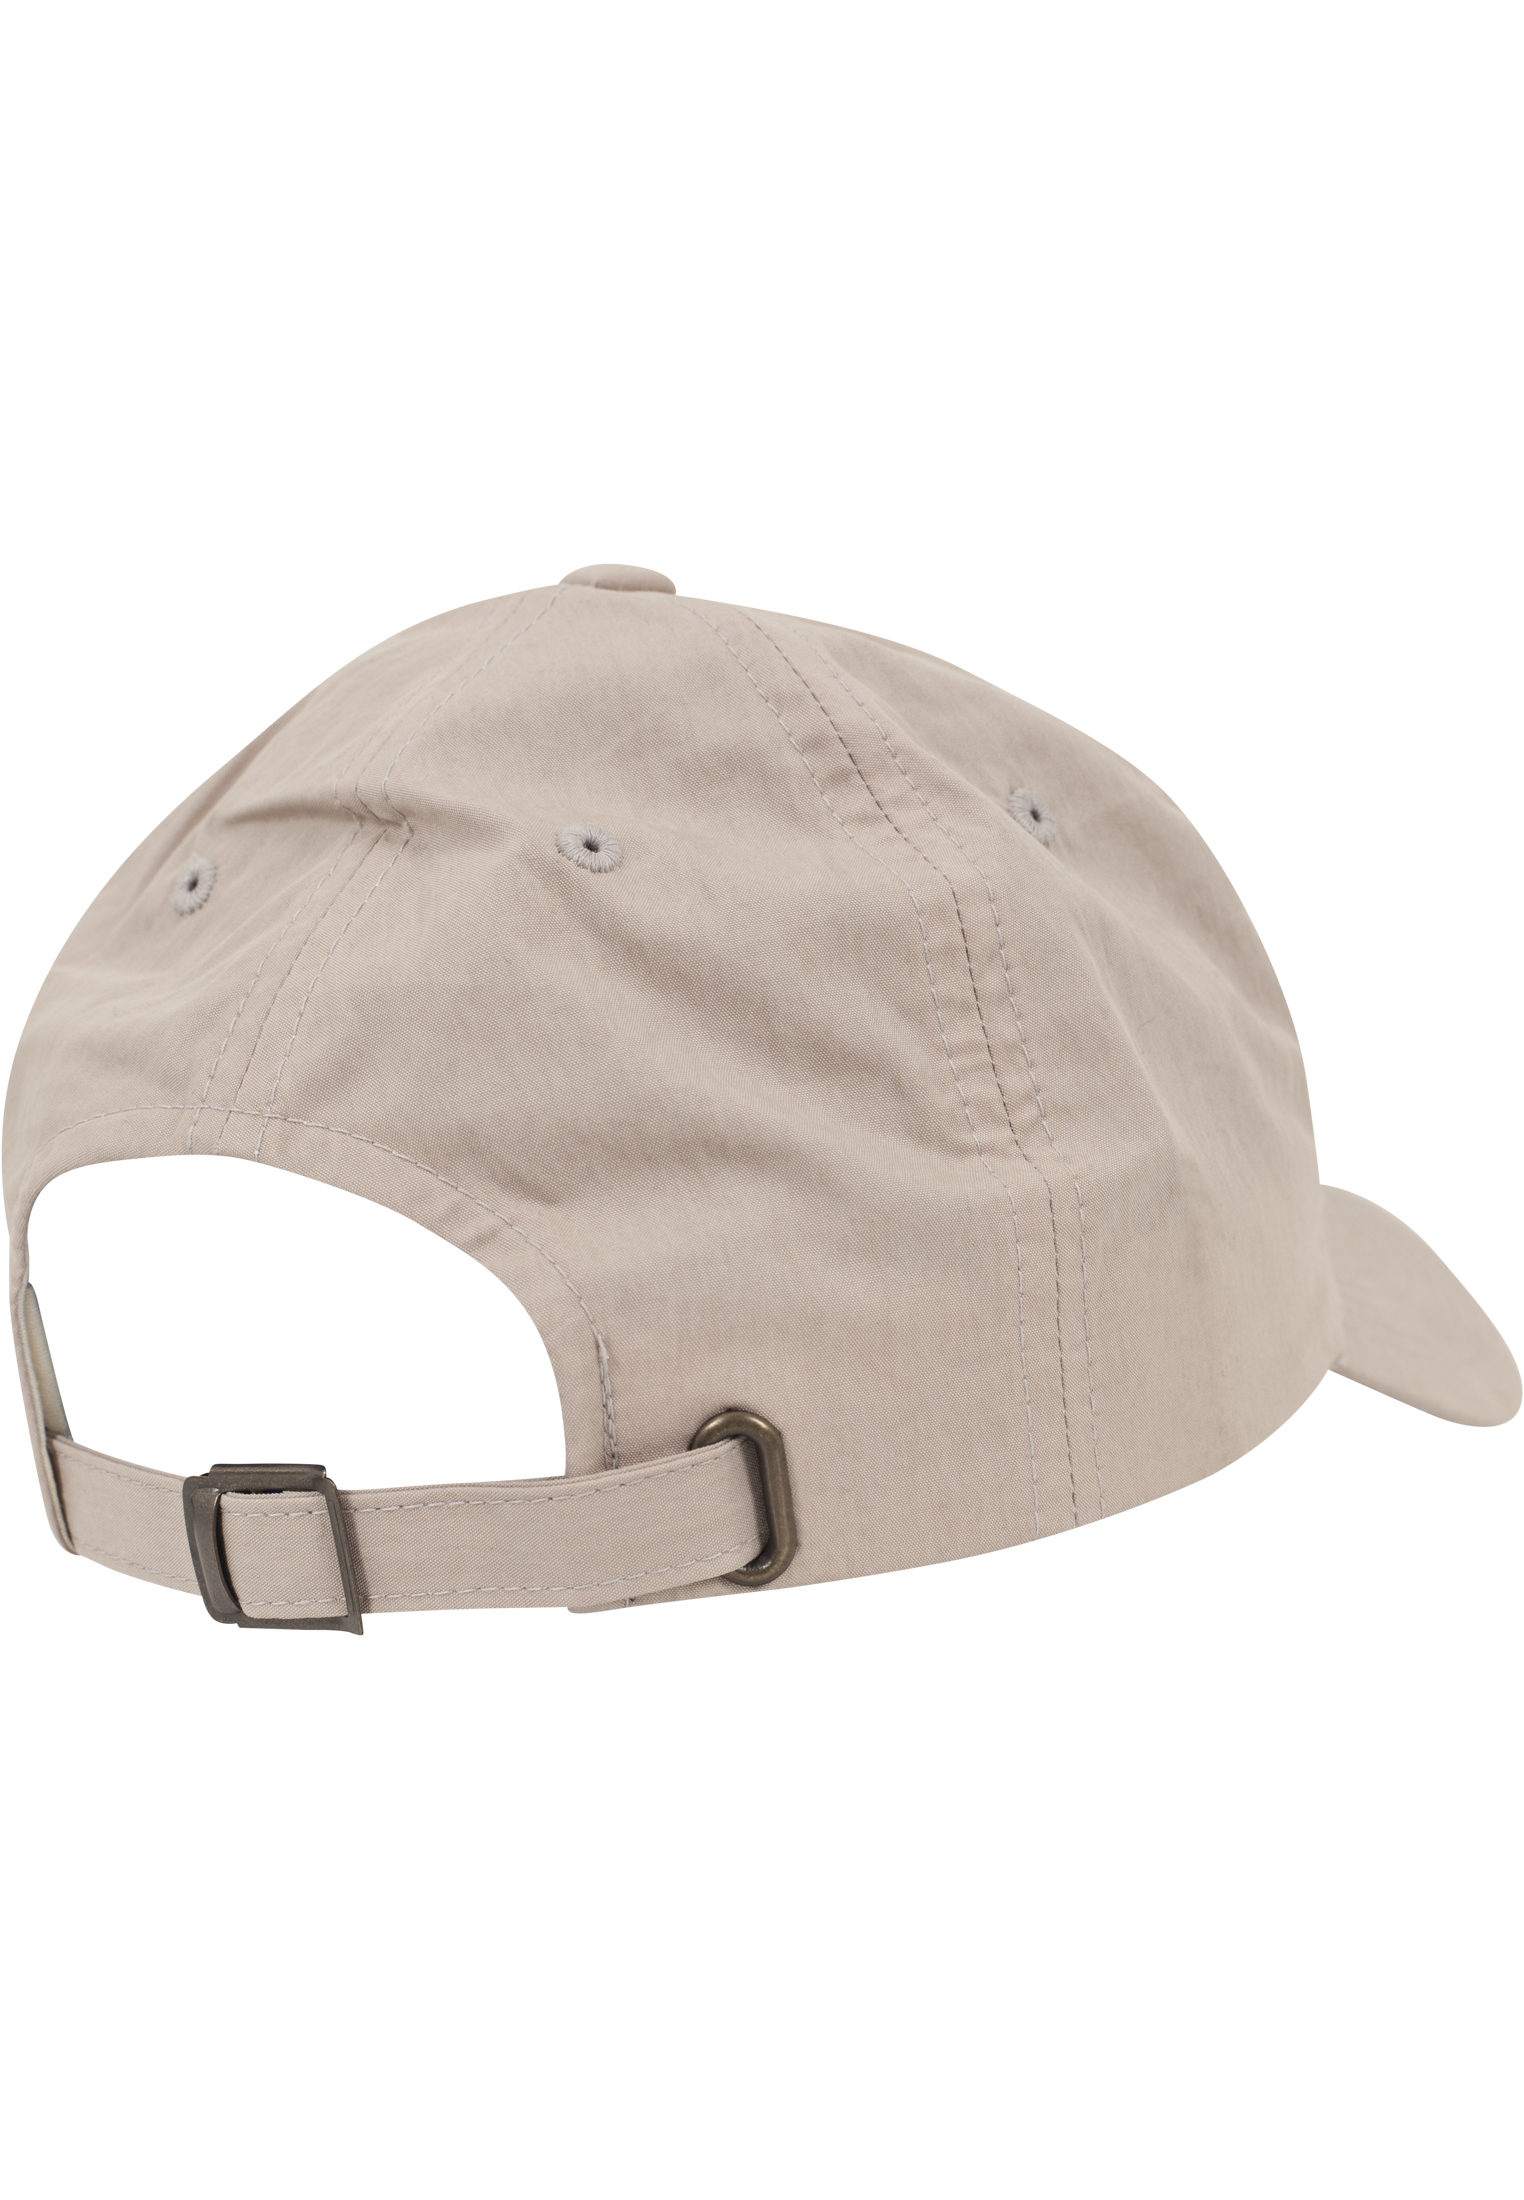 Low Profile Washed Cap-6245W